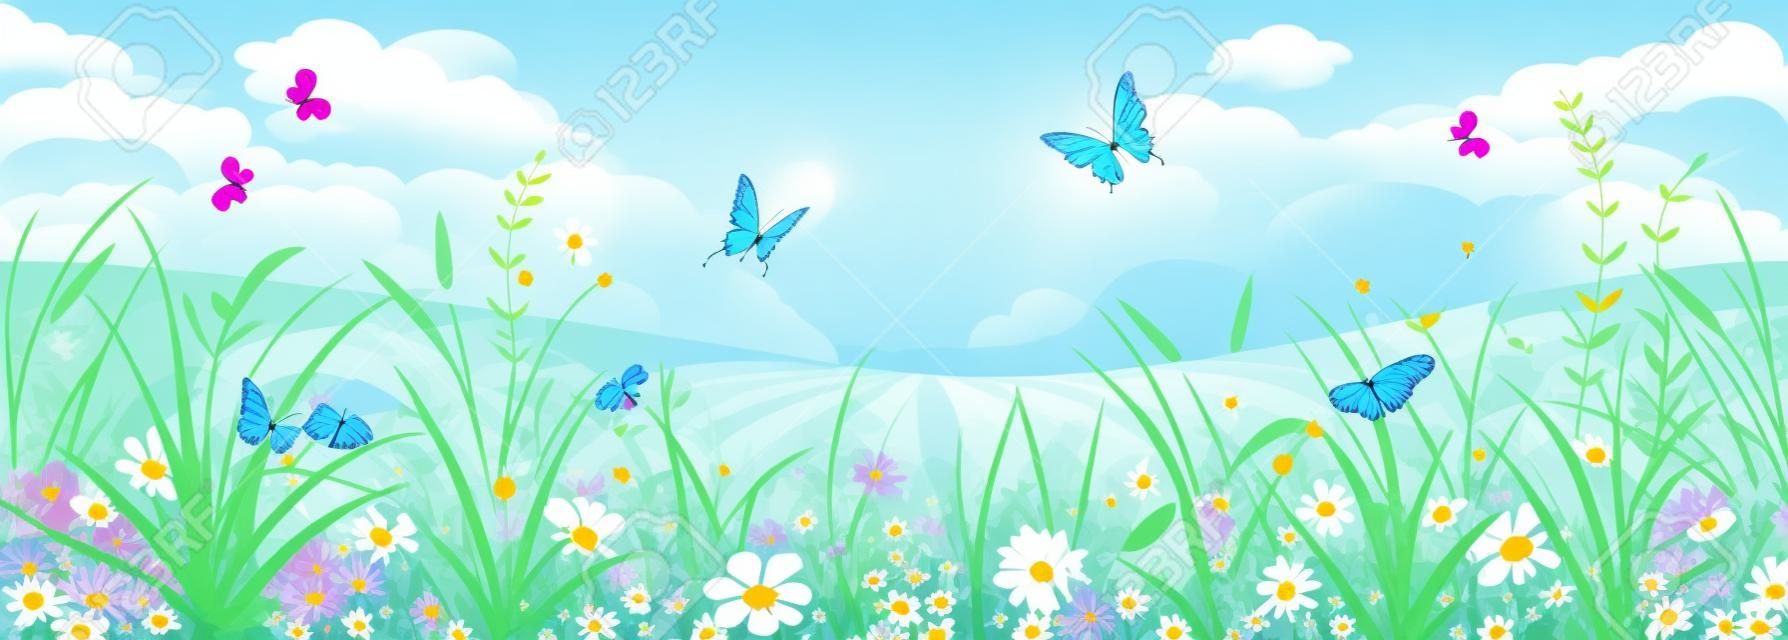 Floral summer or spring landscape, meadow with flowers, blue sky and butterflies